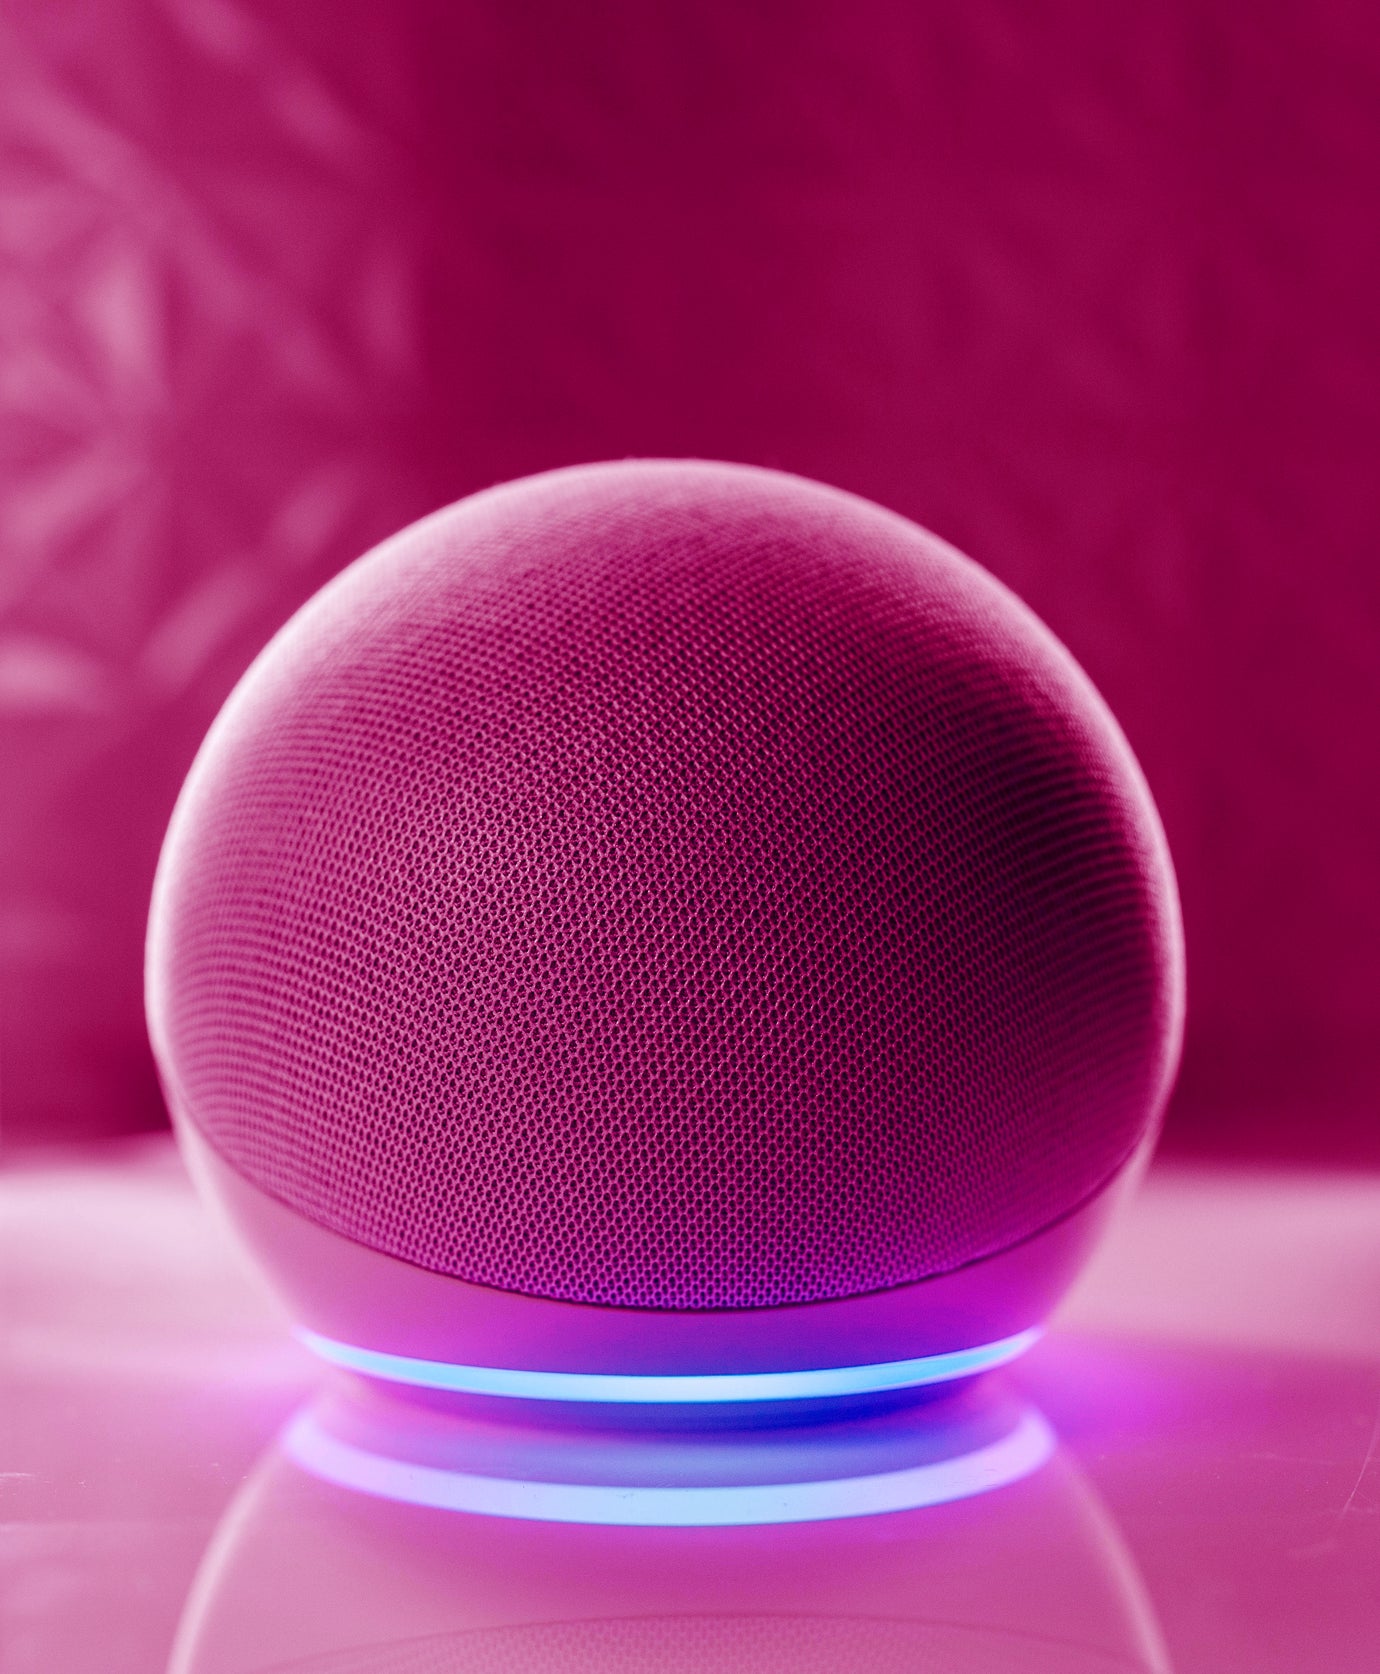 A portable spherical speaker with glowing light